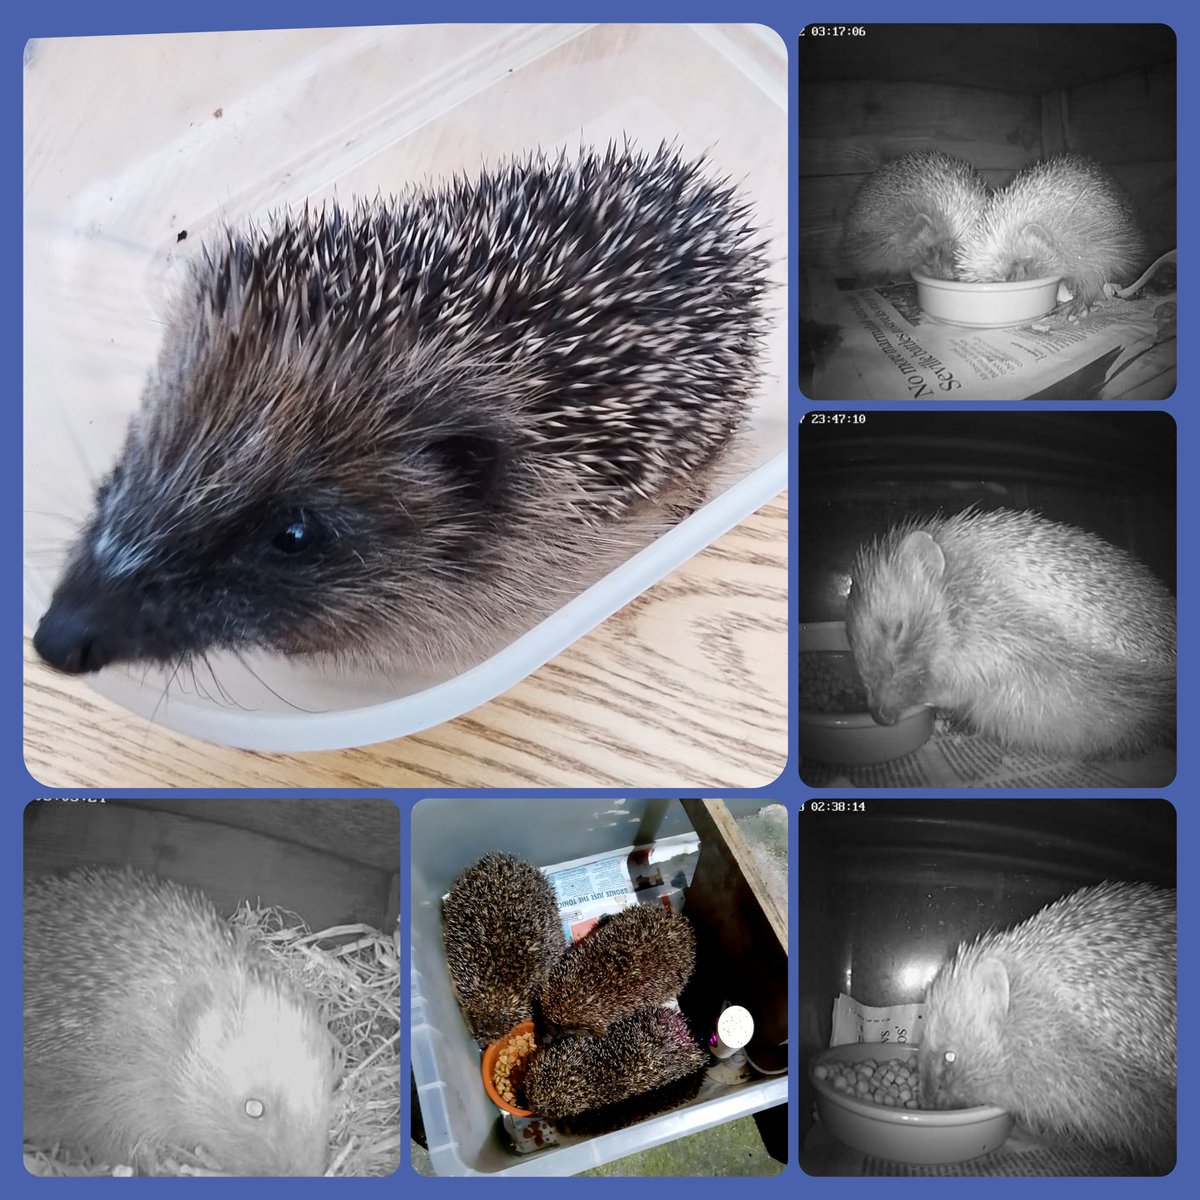 #HedgehogWeek 🦔 We're lucky enough to have regular night visitors to the Hedgehog Cafe on our garden (& some bed down for the day in the box!). If you have a garden, please check how #hedgehogfriendly it is or routes through! 
@hedgehogsociety @HedgehogCabin @Poppyshedgehogs